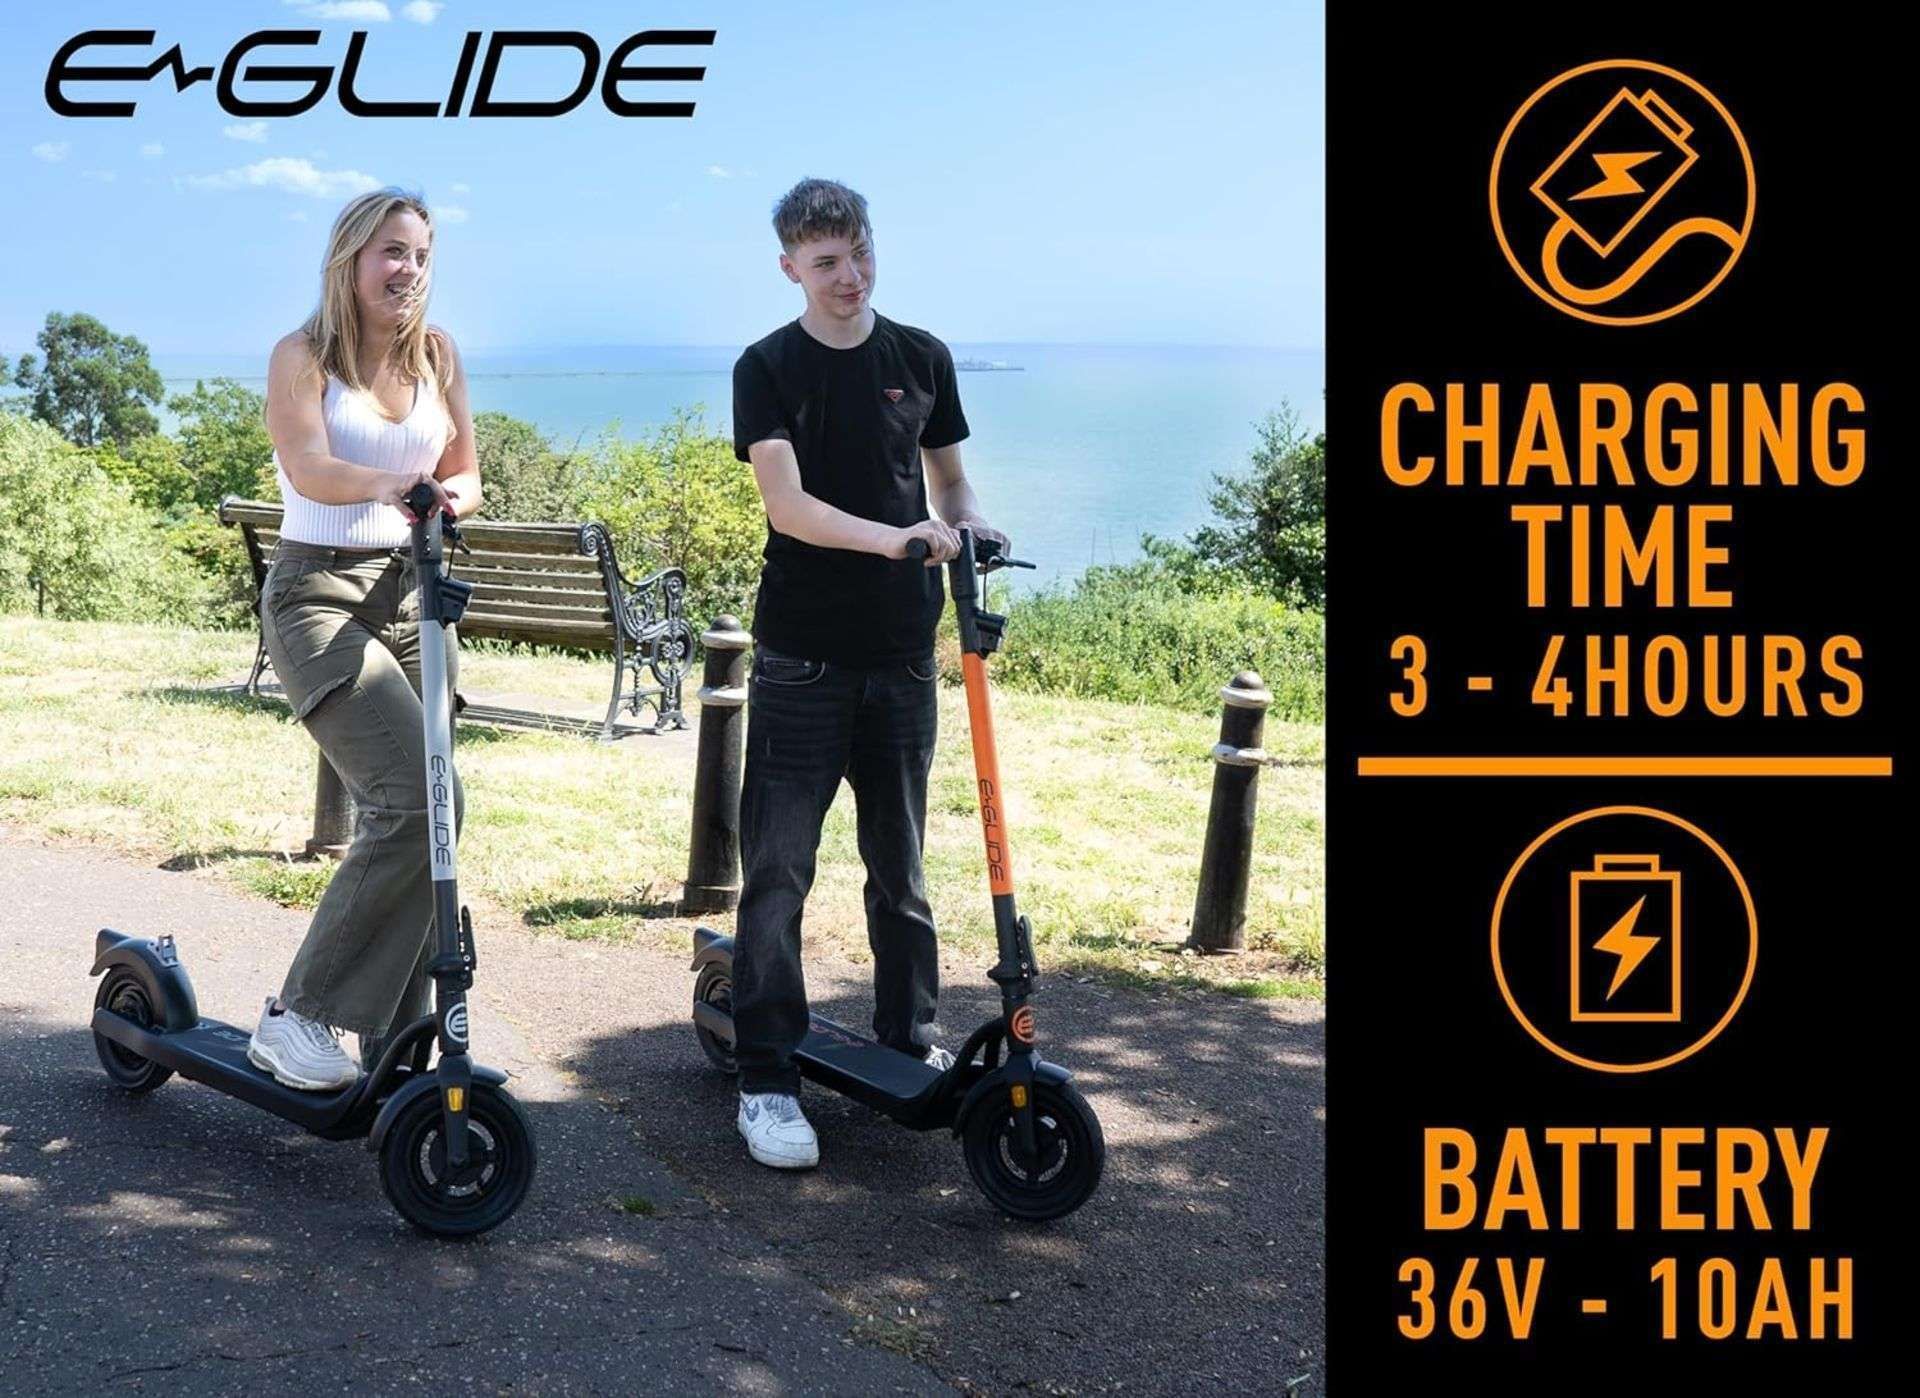 Brand New E-Glide V2 Electric Scooter Orange and Black RRP £599, Introducing a sleek and efficient - Bild 4 aus 5